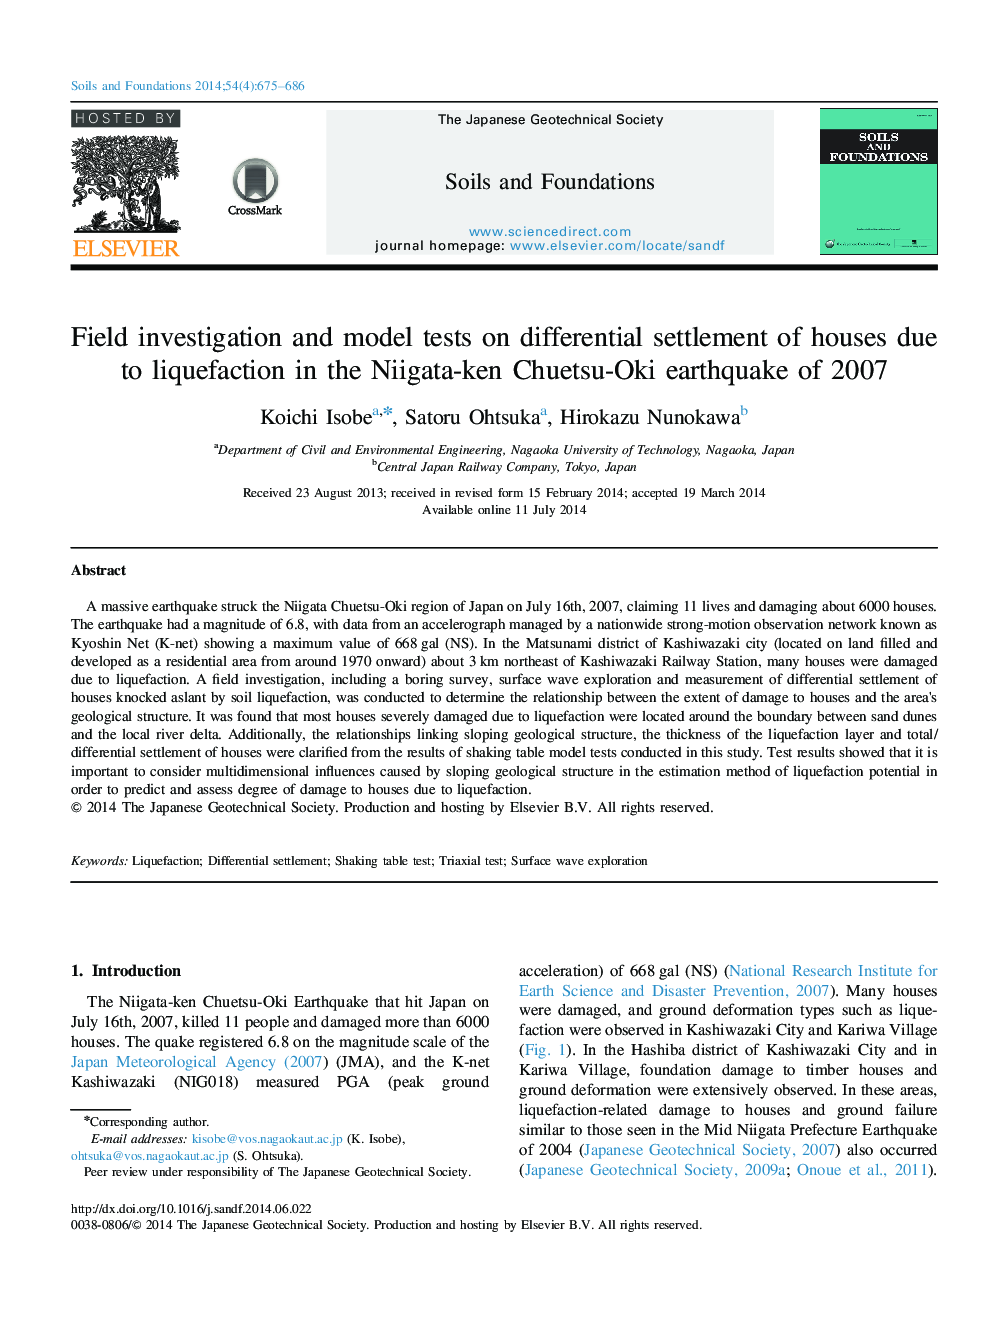 Field investigation and model tests on differential settlement of houses due to liquefaction in the Niigata-ken Chuetsu-Oki earthquake of 2007 